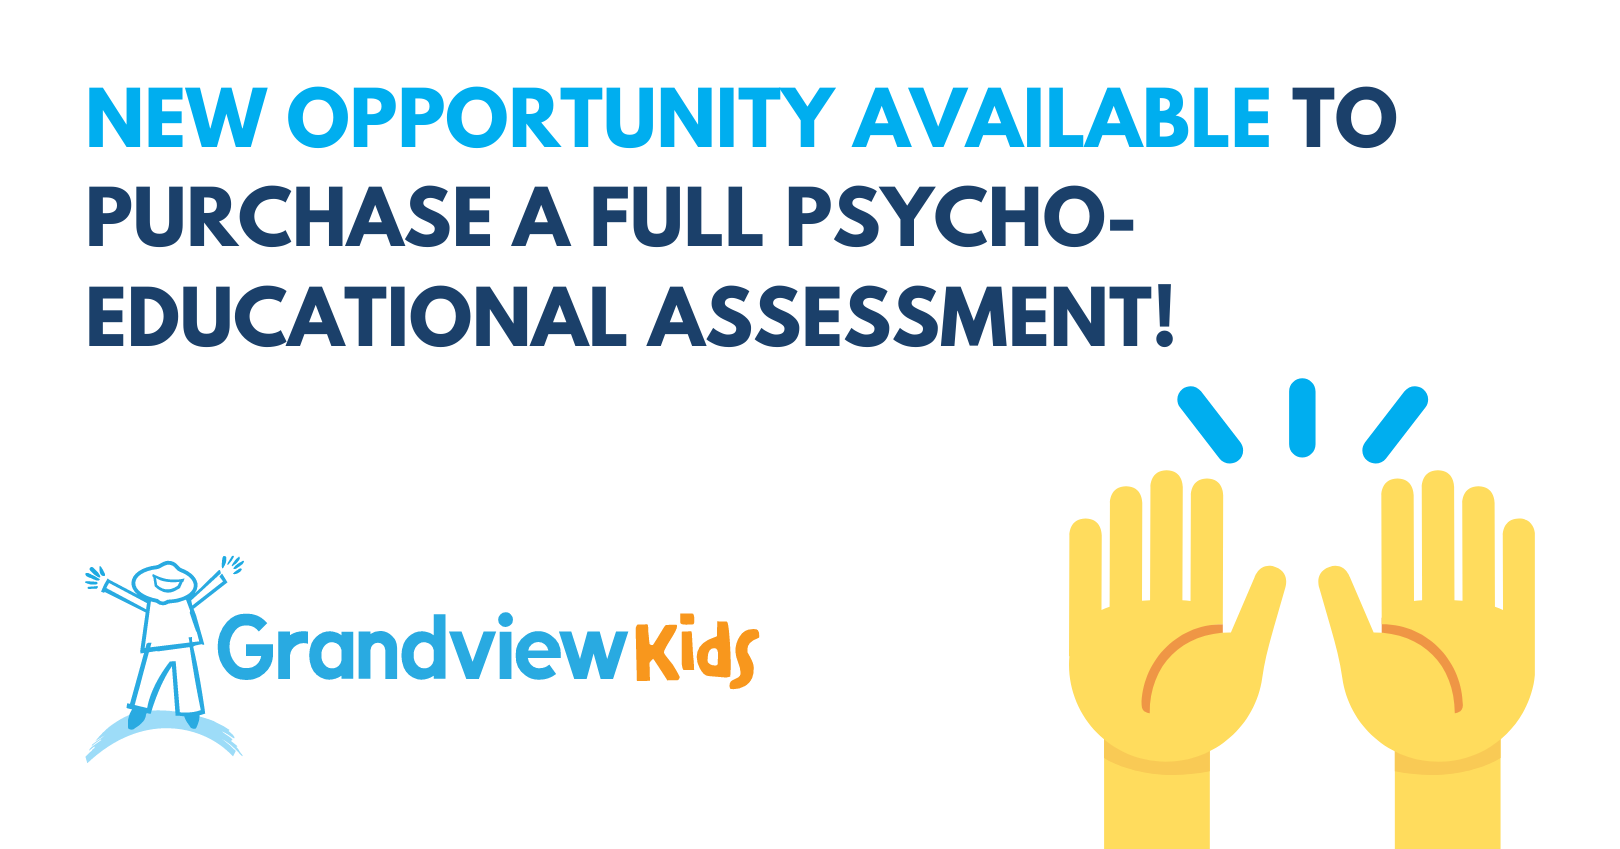 New opportunity available to purchase a full psycho-educational assessment